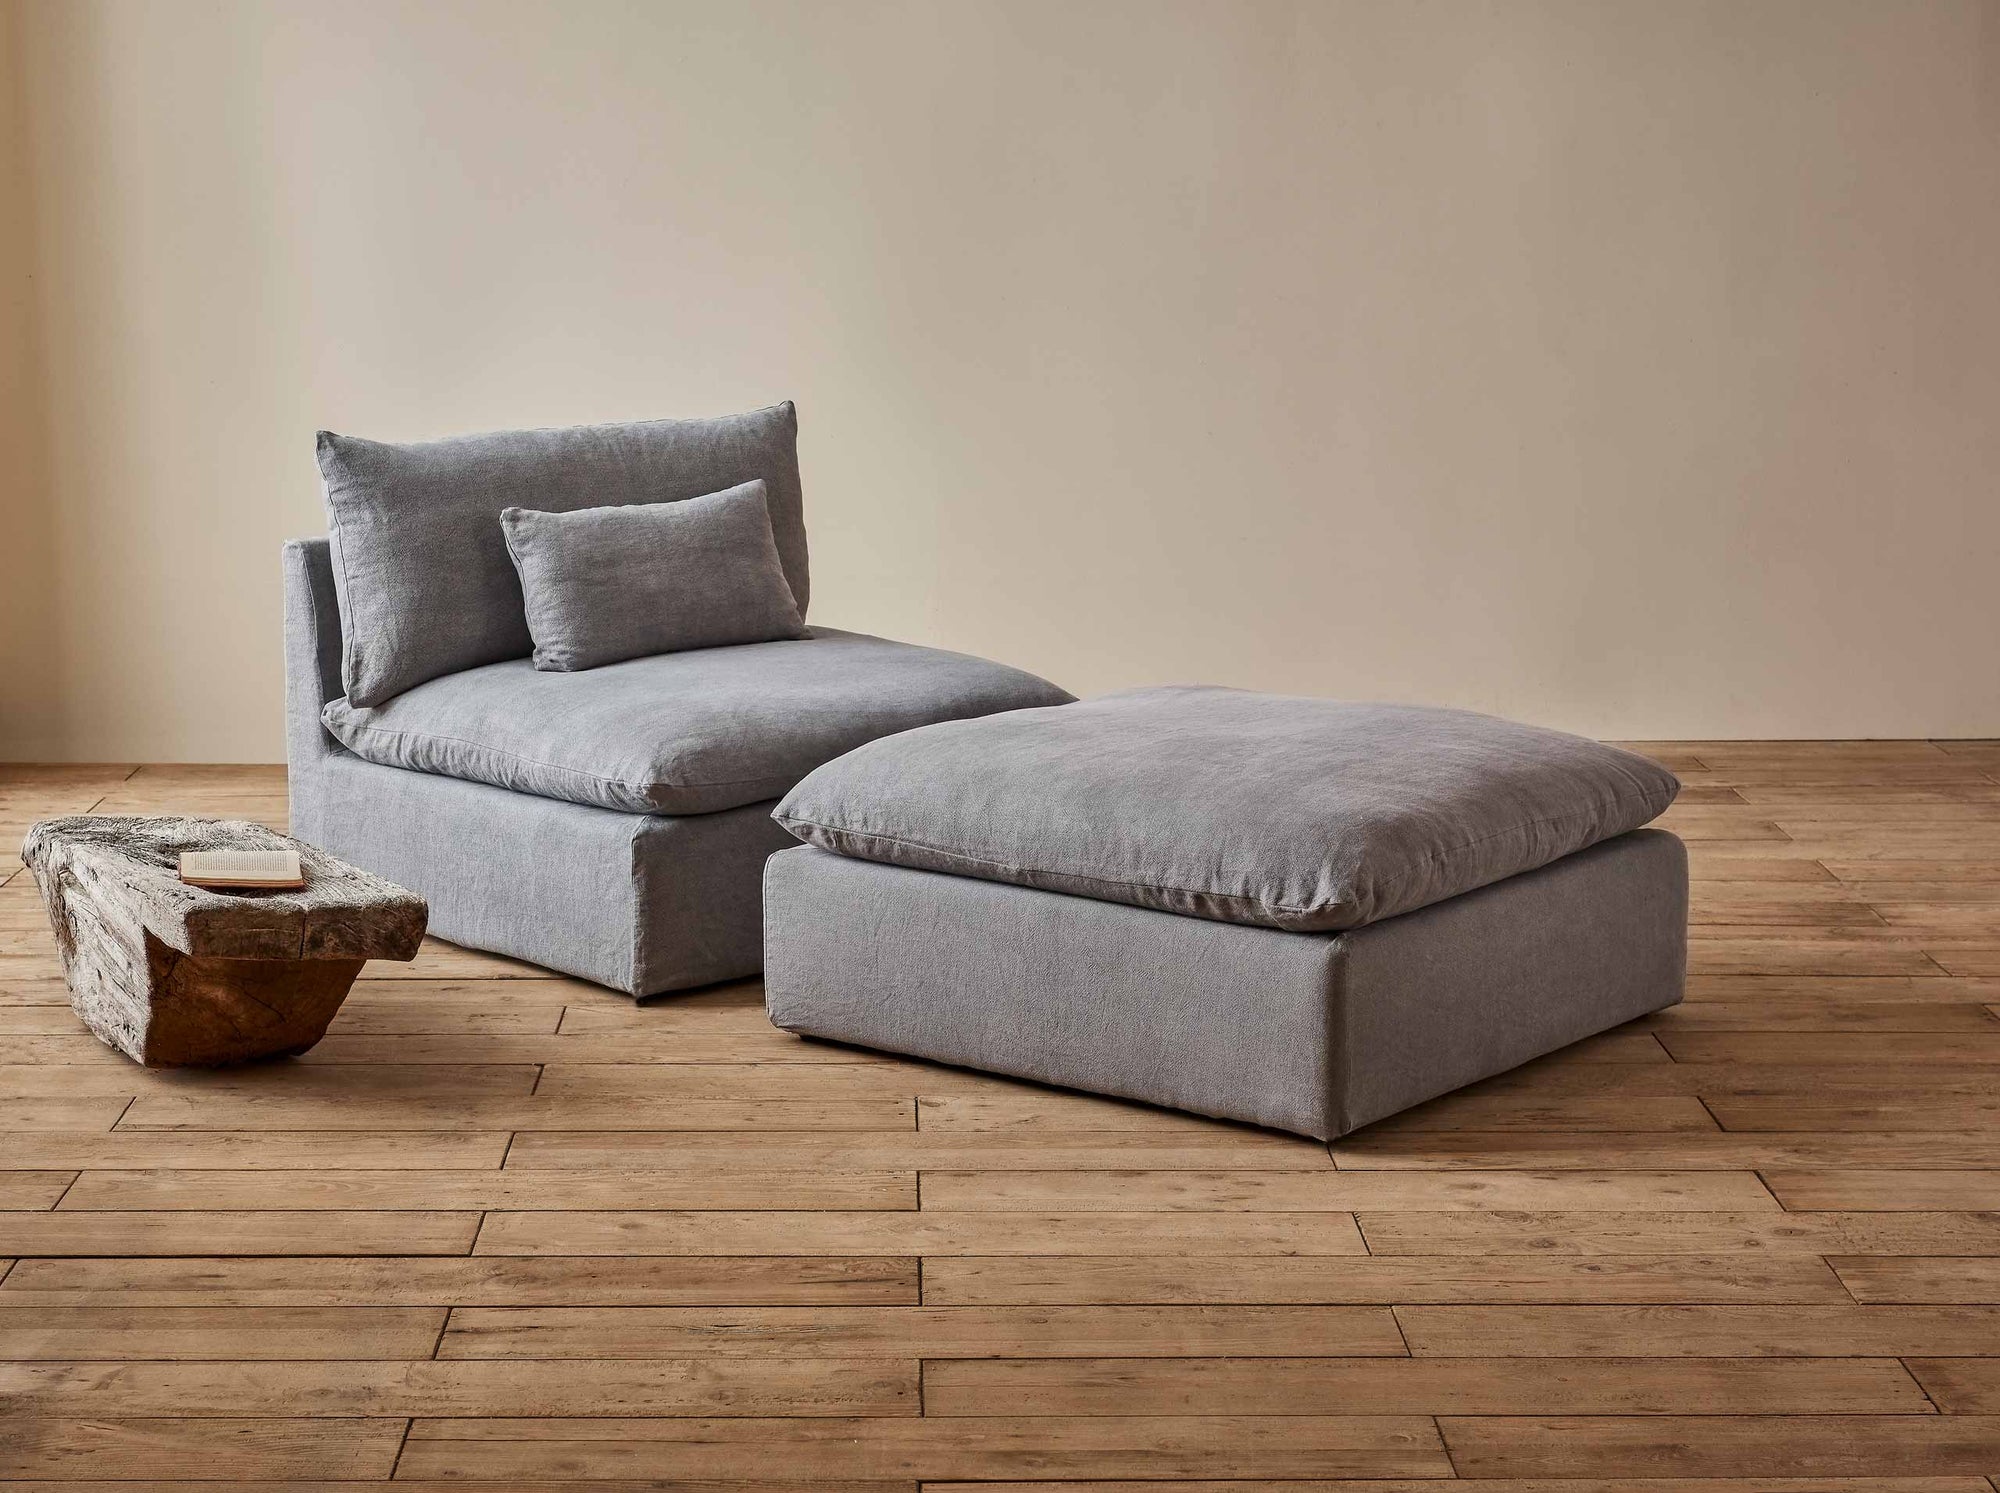 Aria Ottoman in Ink Cap, a medium cool grey Light Weight Linen, placed in a room with the Aria Chair